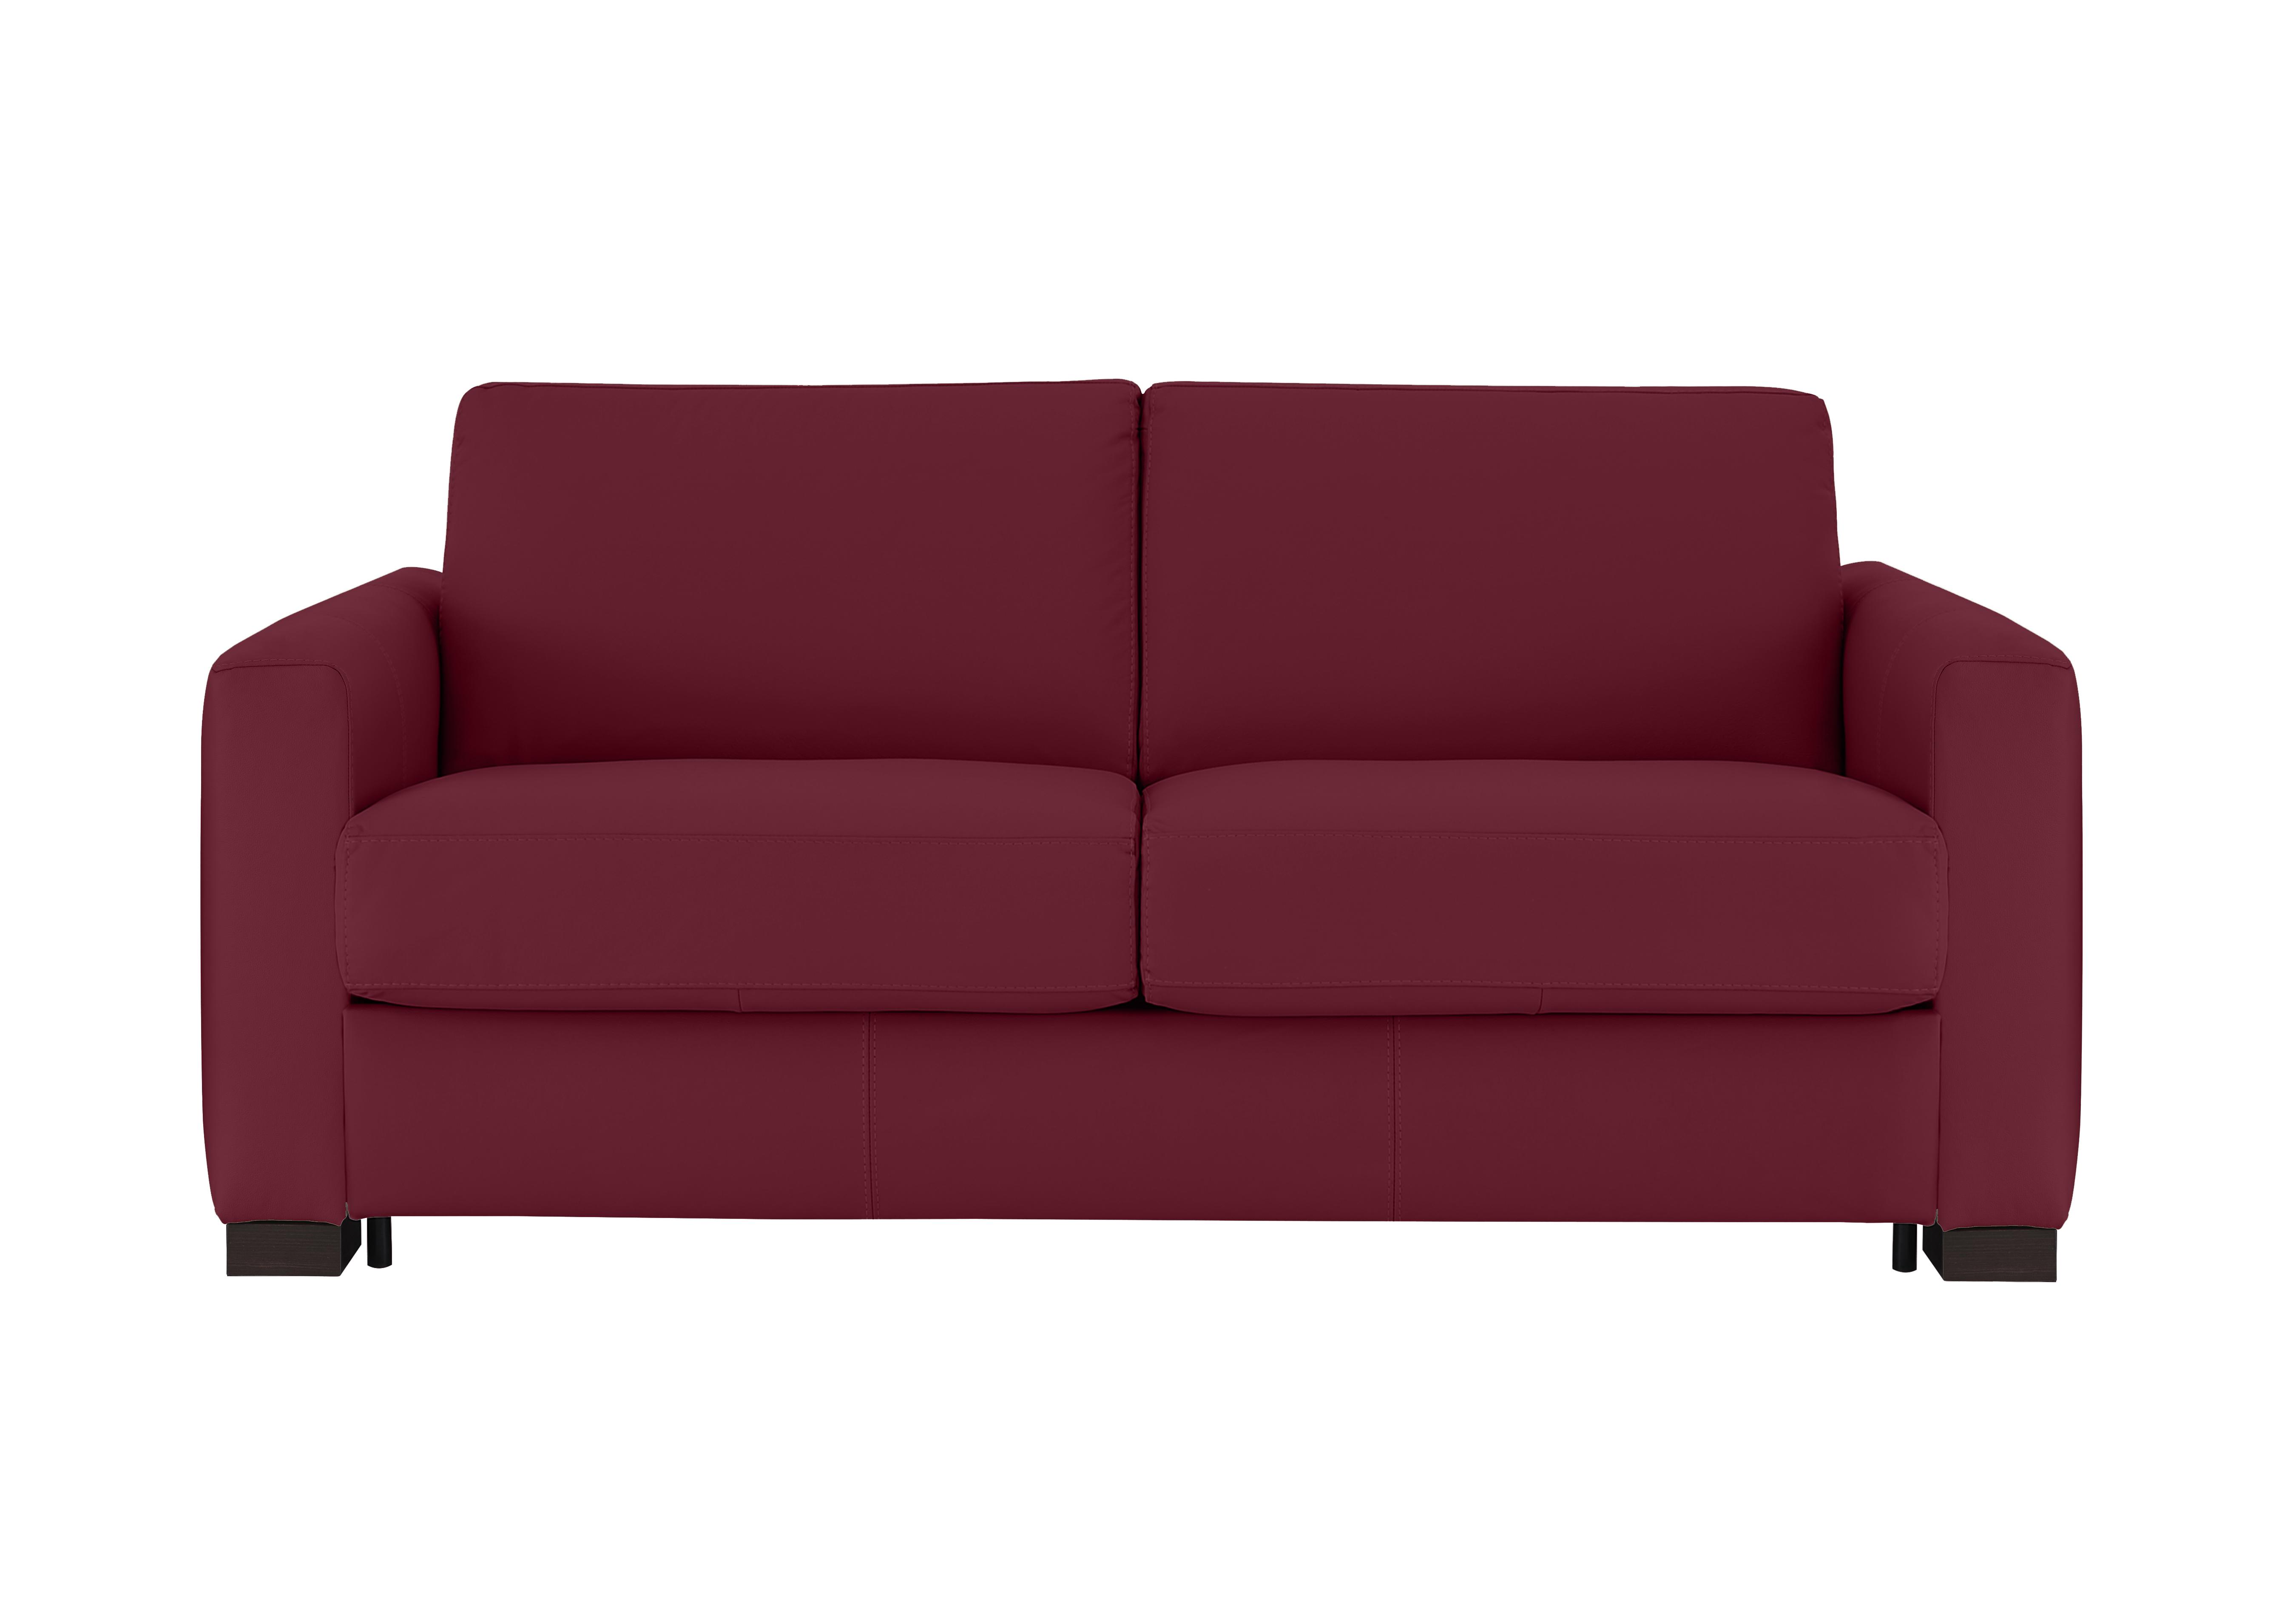 Alcova 2.5 Seater Leather Sofa Bed with Box Arms in Dali Bordeaux 1521 on Furniture Village